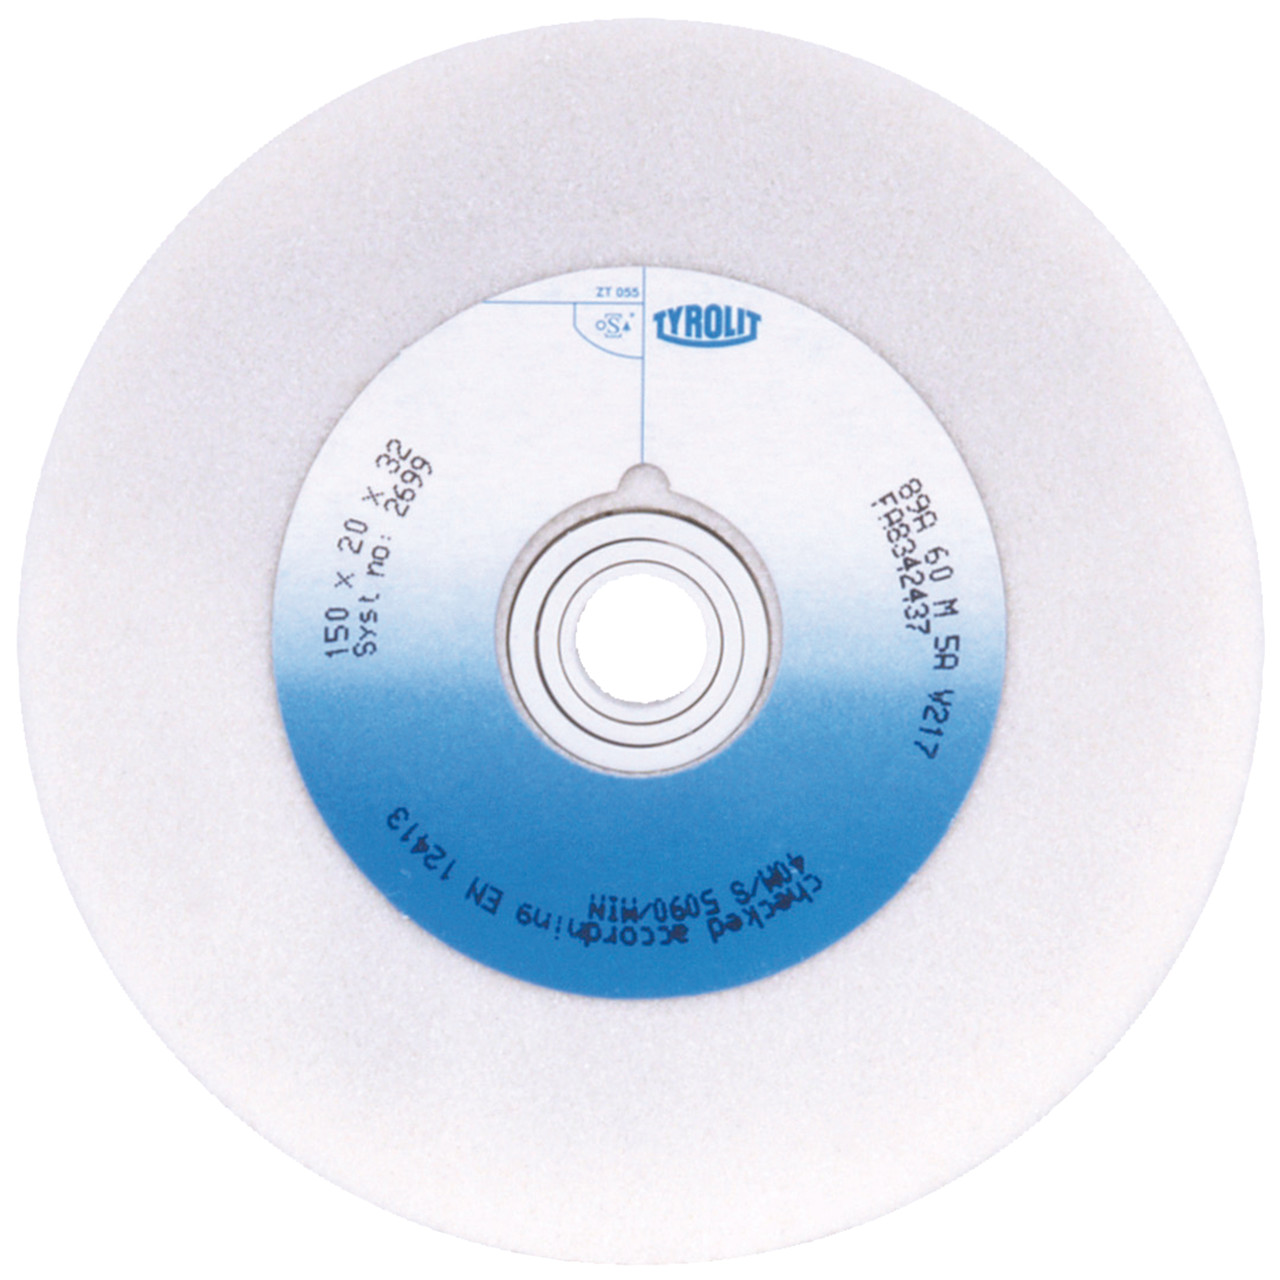 Tyrolit Conventional ceramic grinding discs DxDxH 175x32x32 For high-alloy steels and HSS, shape: 1, Art. 3020